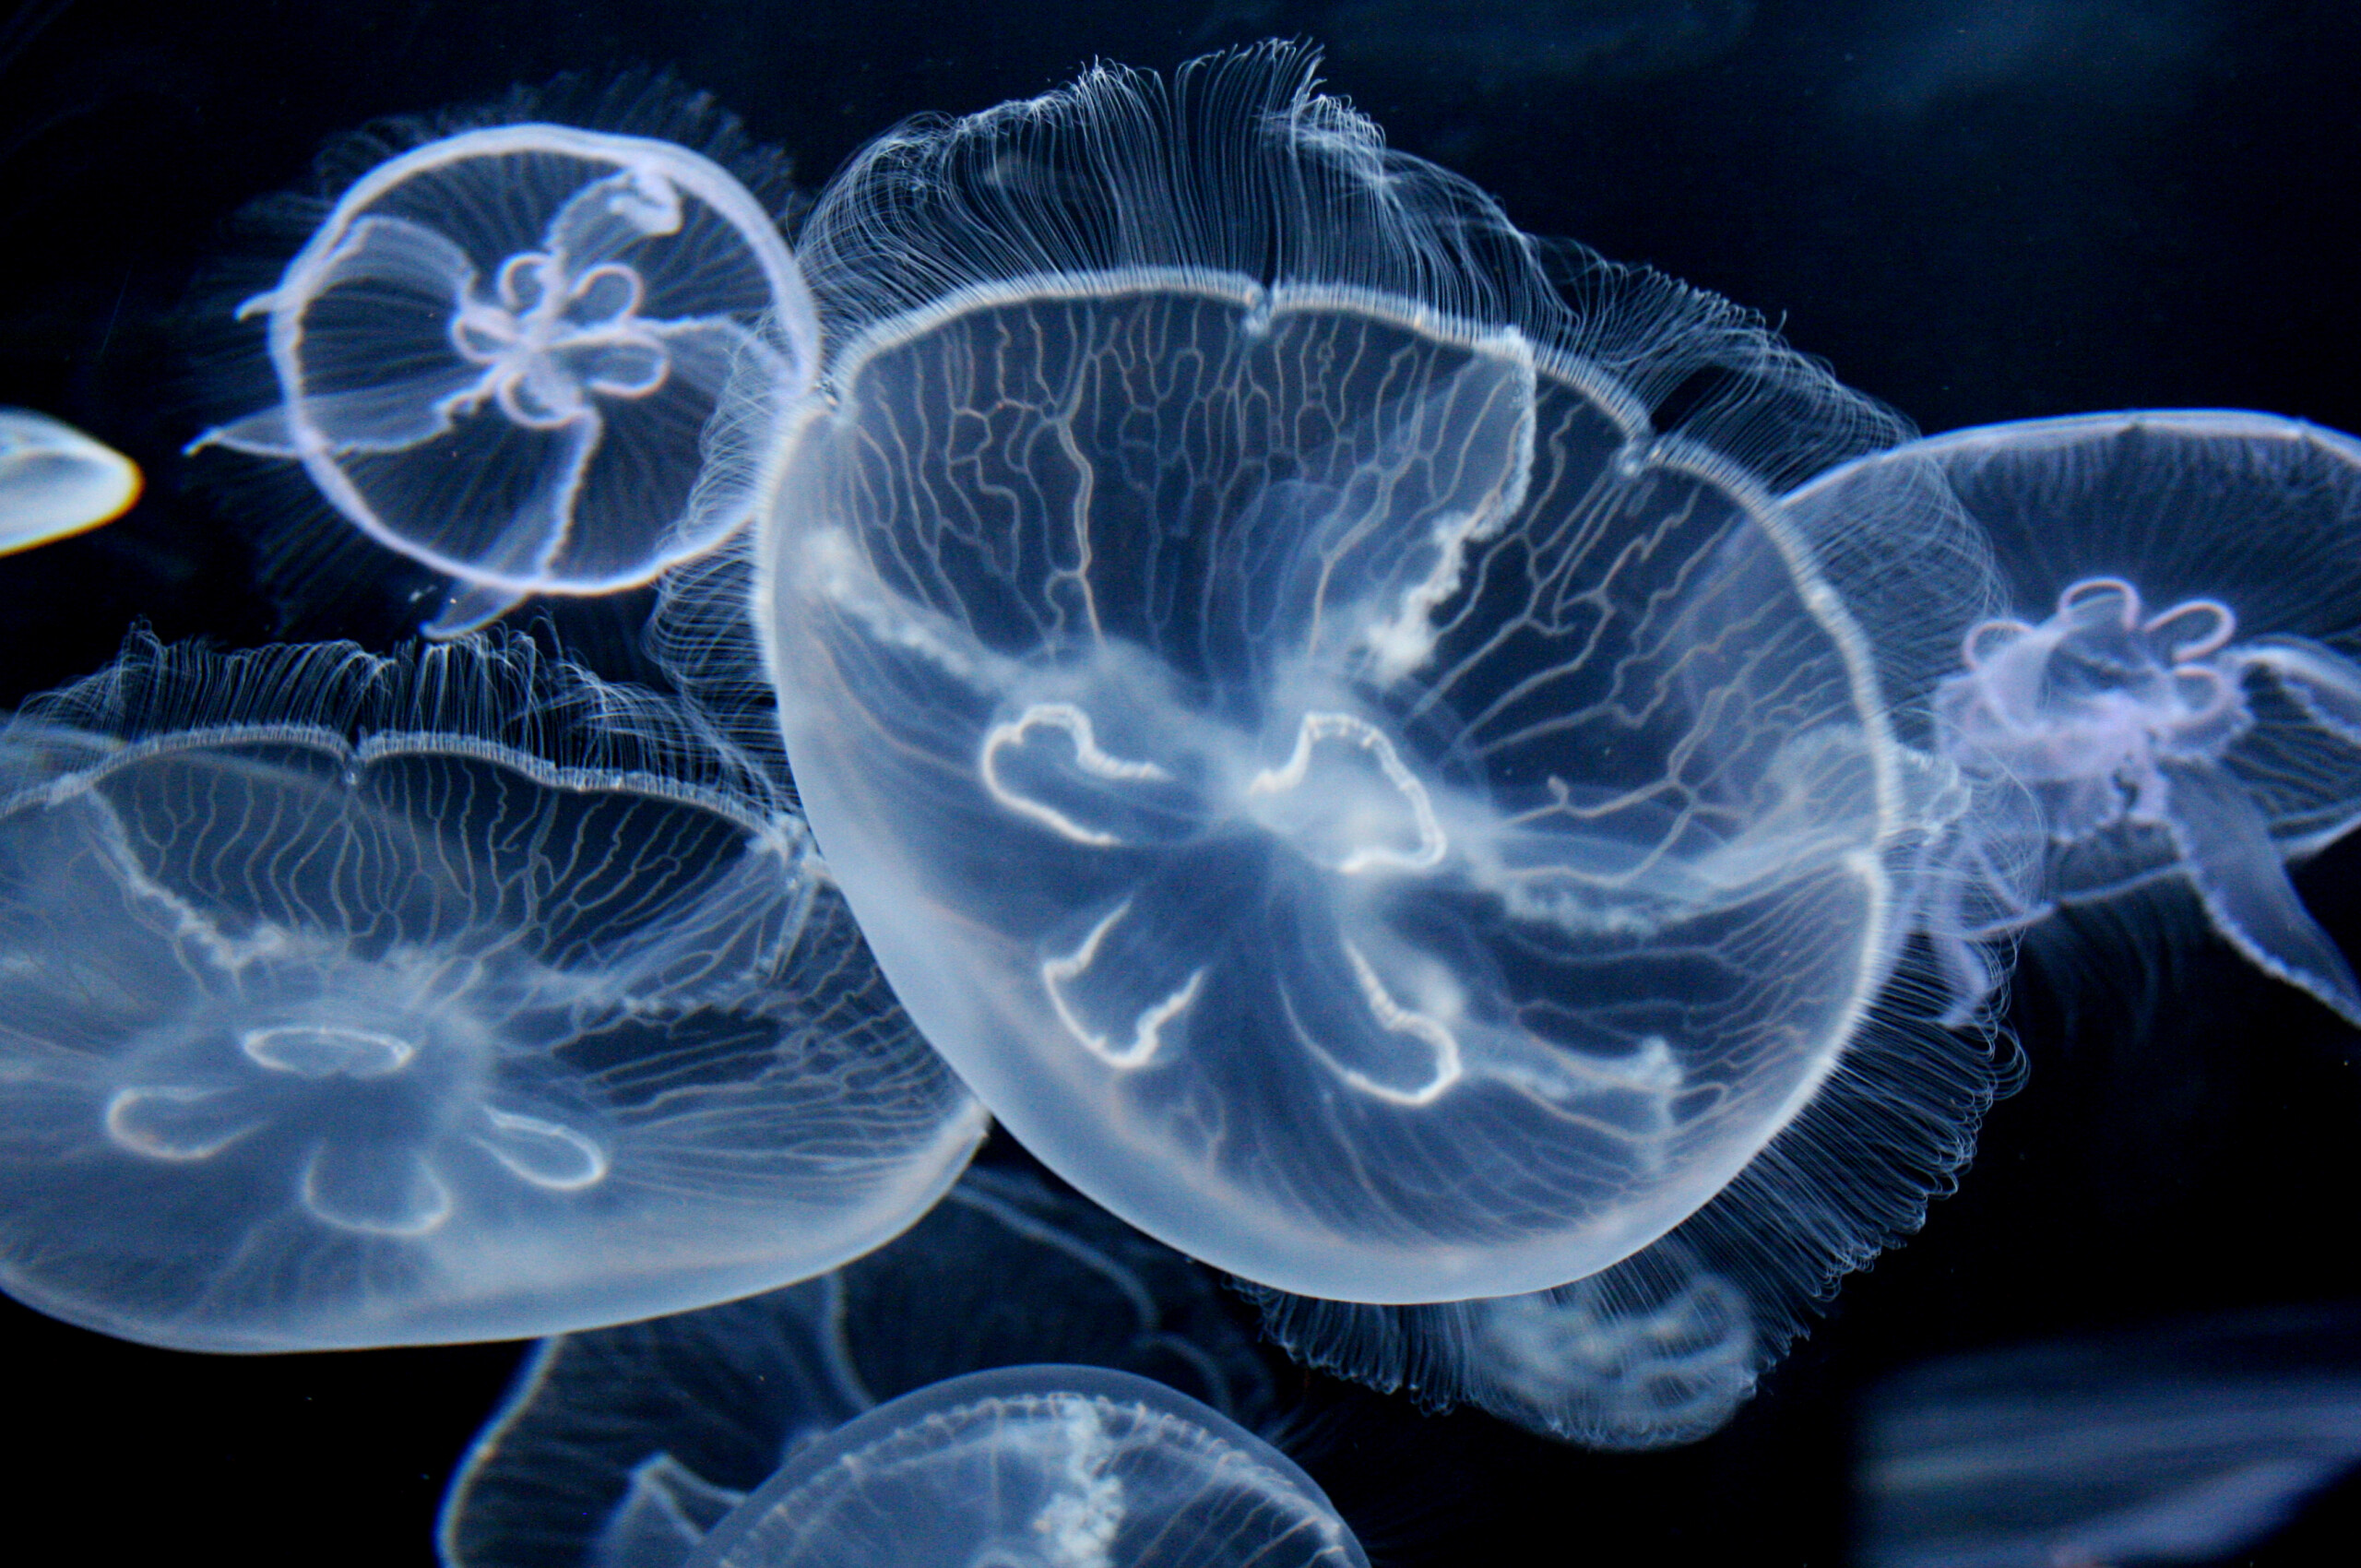 Glowing Jellyfish: Aurelia aurita, A species of the genus Aurelia, Diffusing oxygen from water through the thin membrane covering its body. 2560x1700 HD Wallpaper.